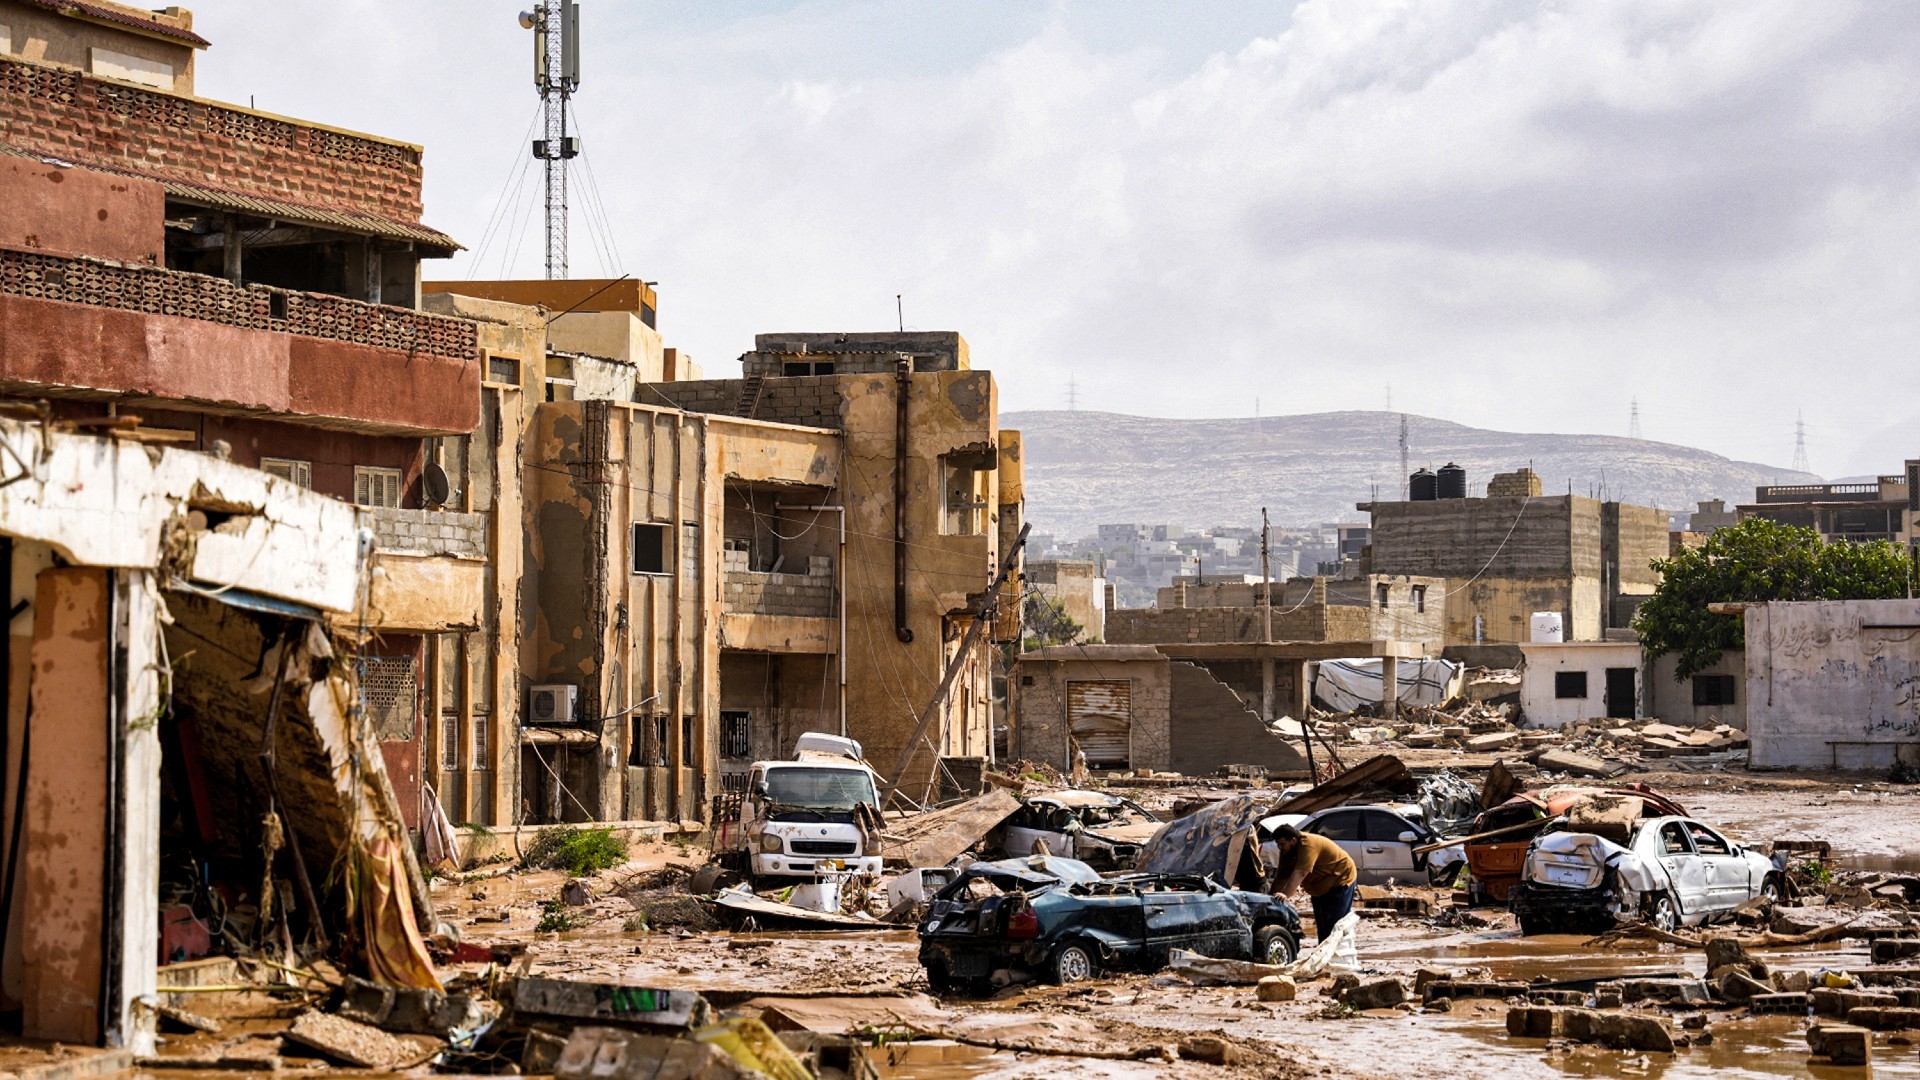 A view of destroyed vehicles and damaged buildings in Derna (AFP/The Press Office of Libyan Prime Minister - Benghazi)